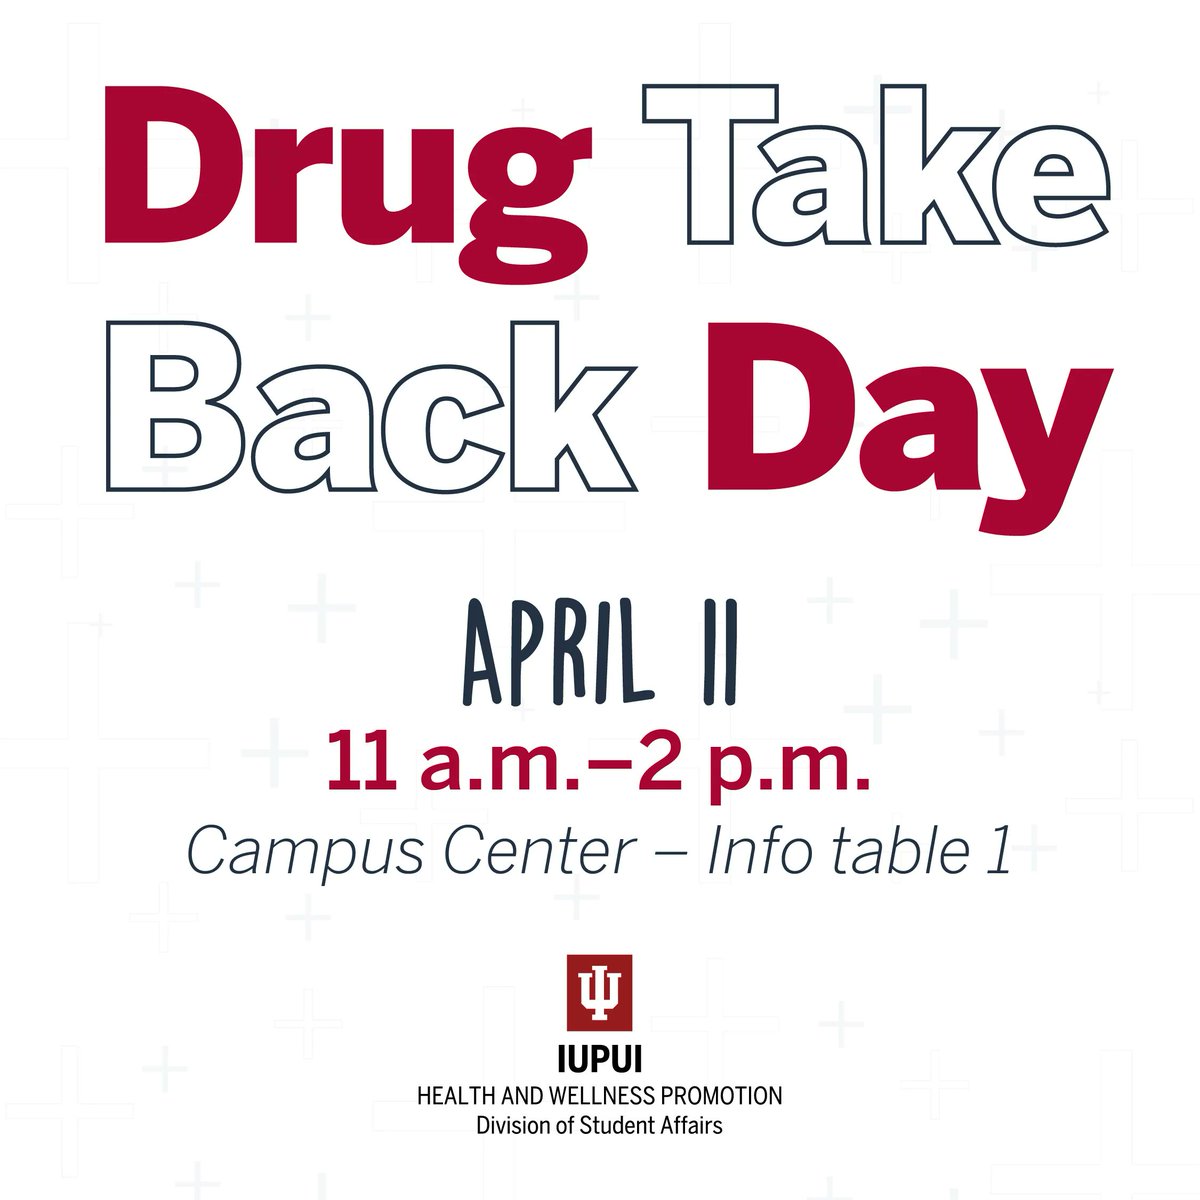 Drop off your unused or expired prescription medications in the Campus Center on Monday. We will be collecting from 11 am - 2 pm on the first floor. #JagWELL #iupui #DrugTakeBackDay